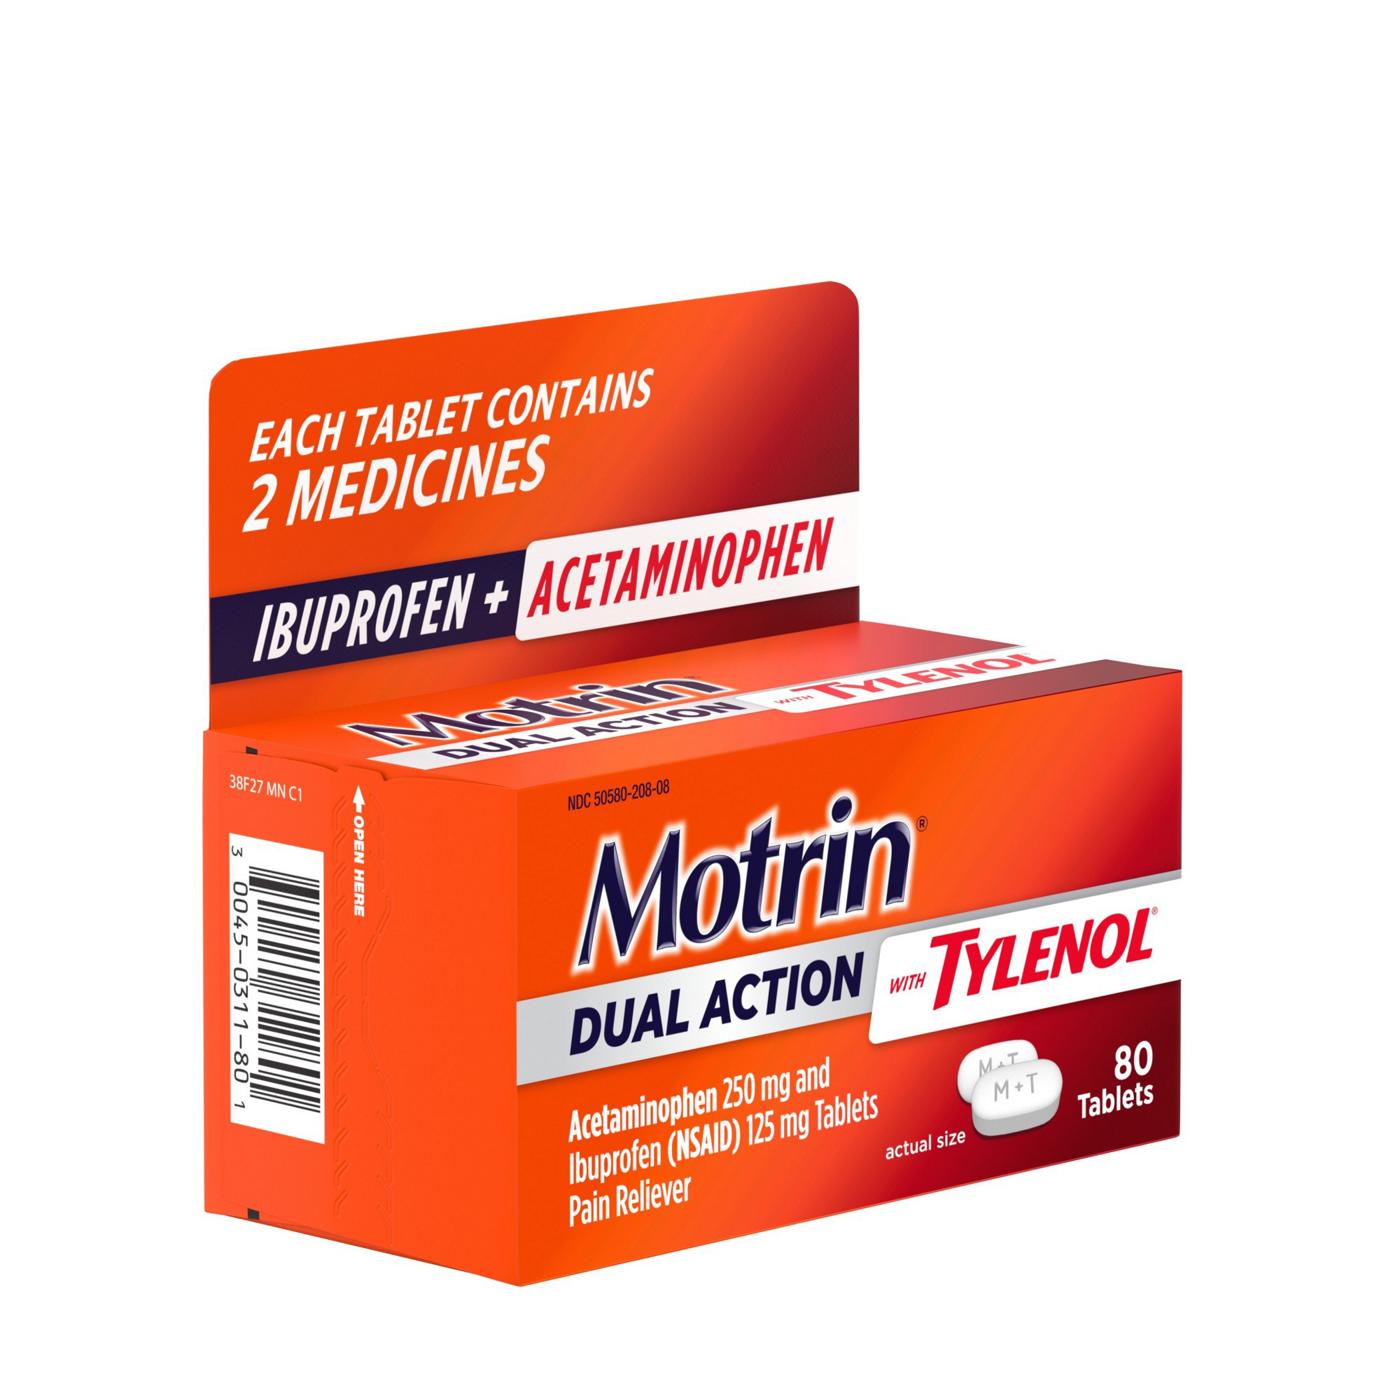 Motrin Dual Action With Tylenol Tablets; image 2 of 3